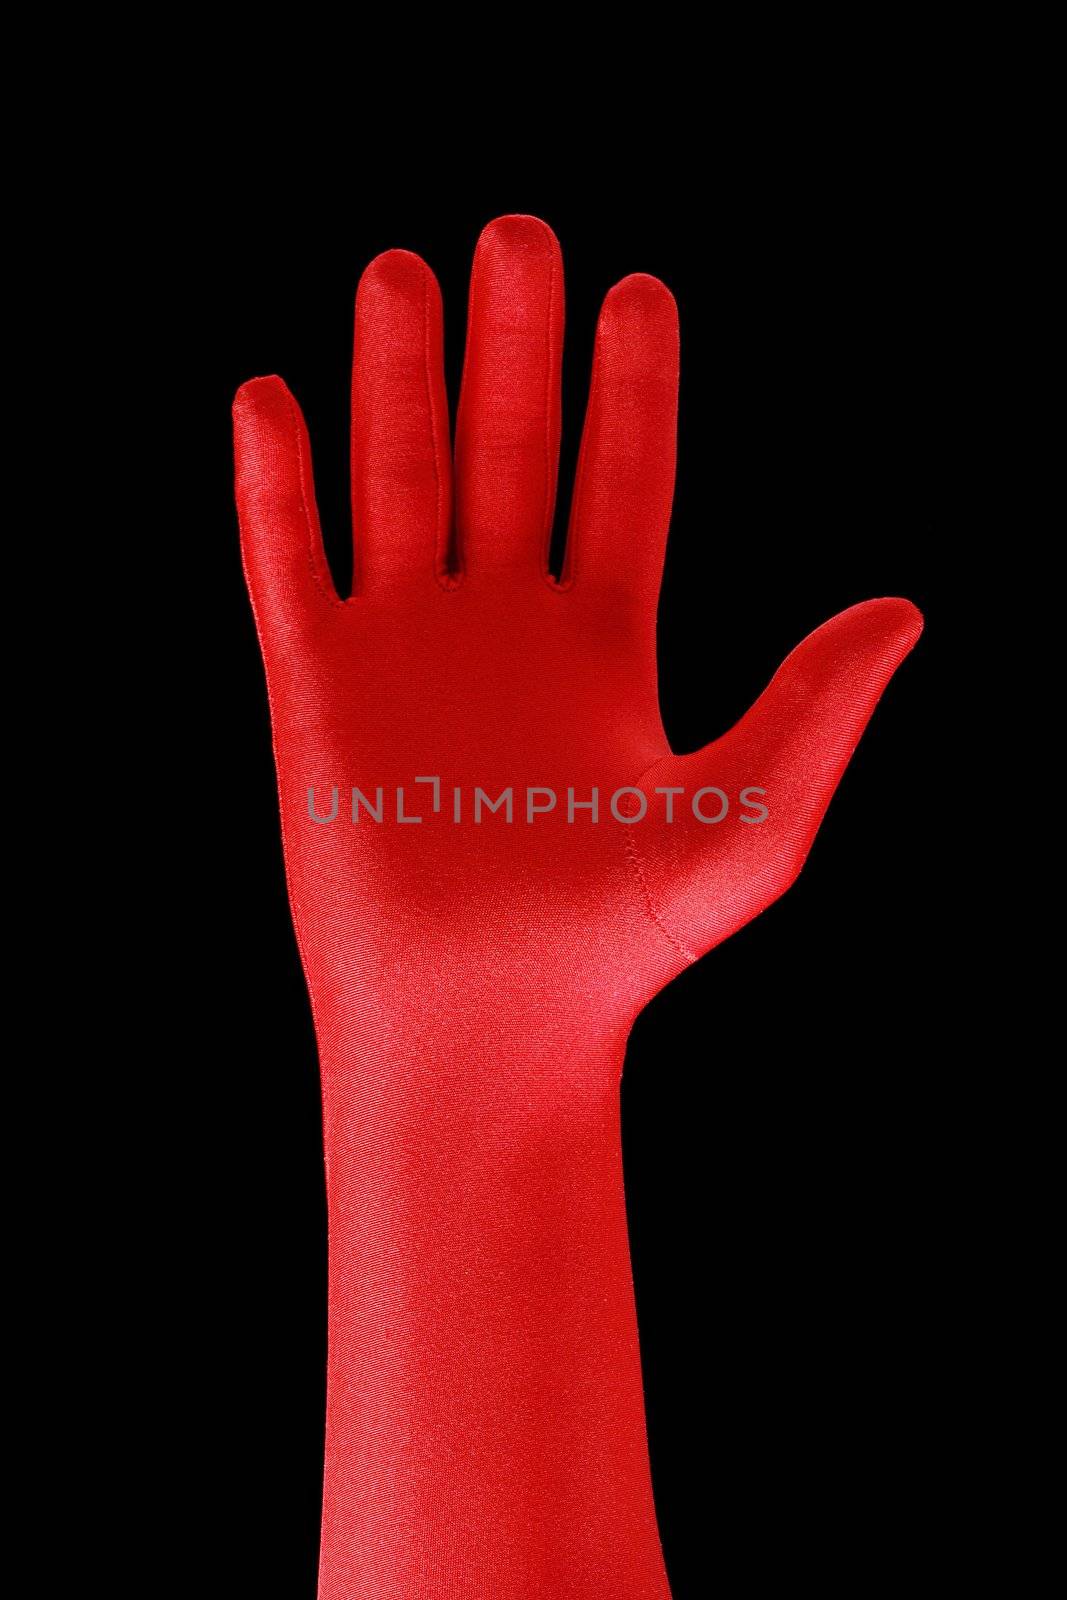 Strange hand with a red glove by Stocksnapper